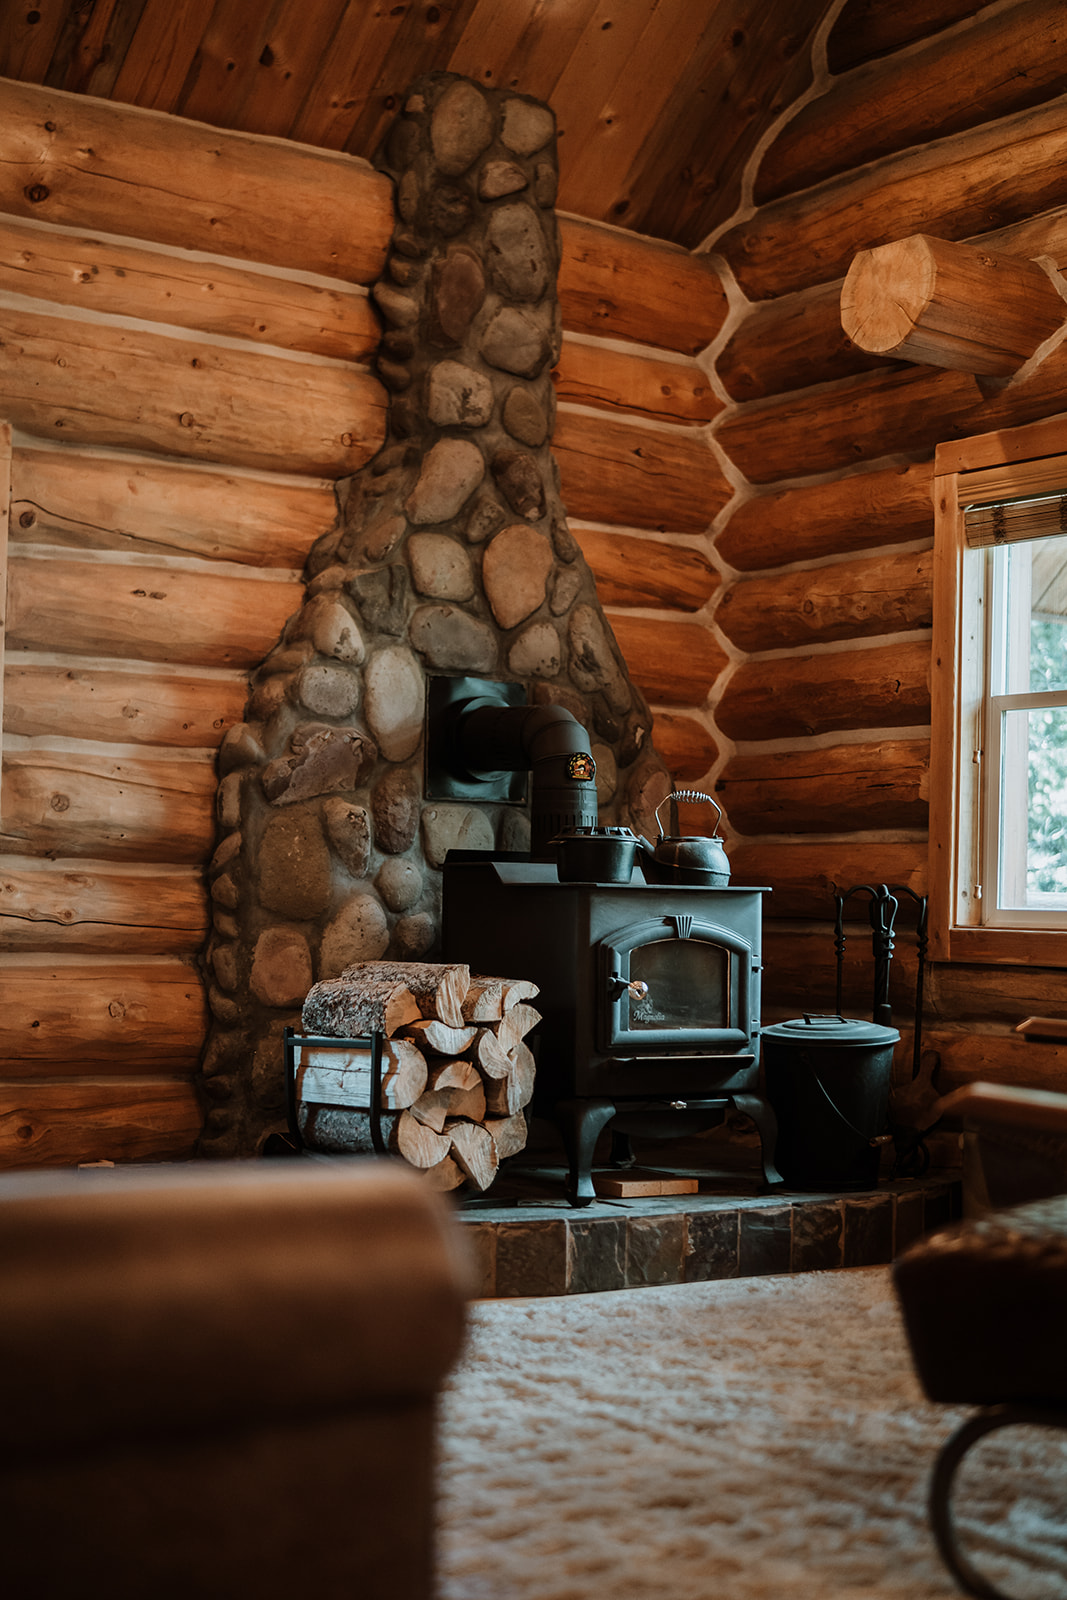 Pine Cone Cabin, one of the best Colorado cabins to book a stay.